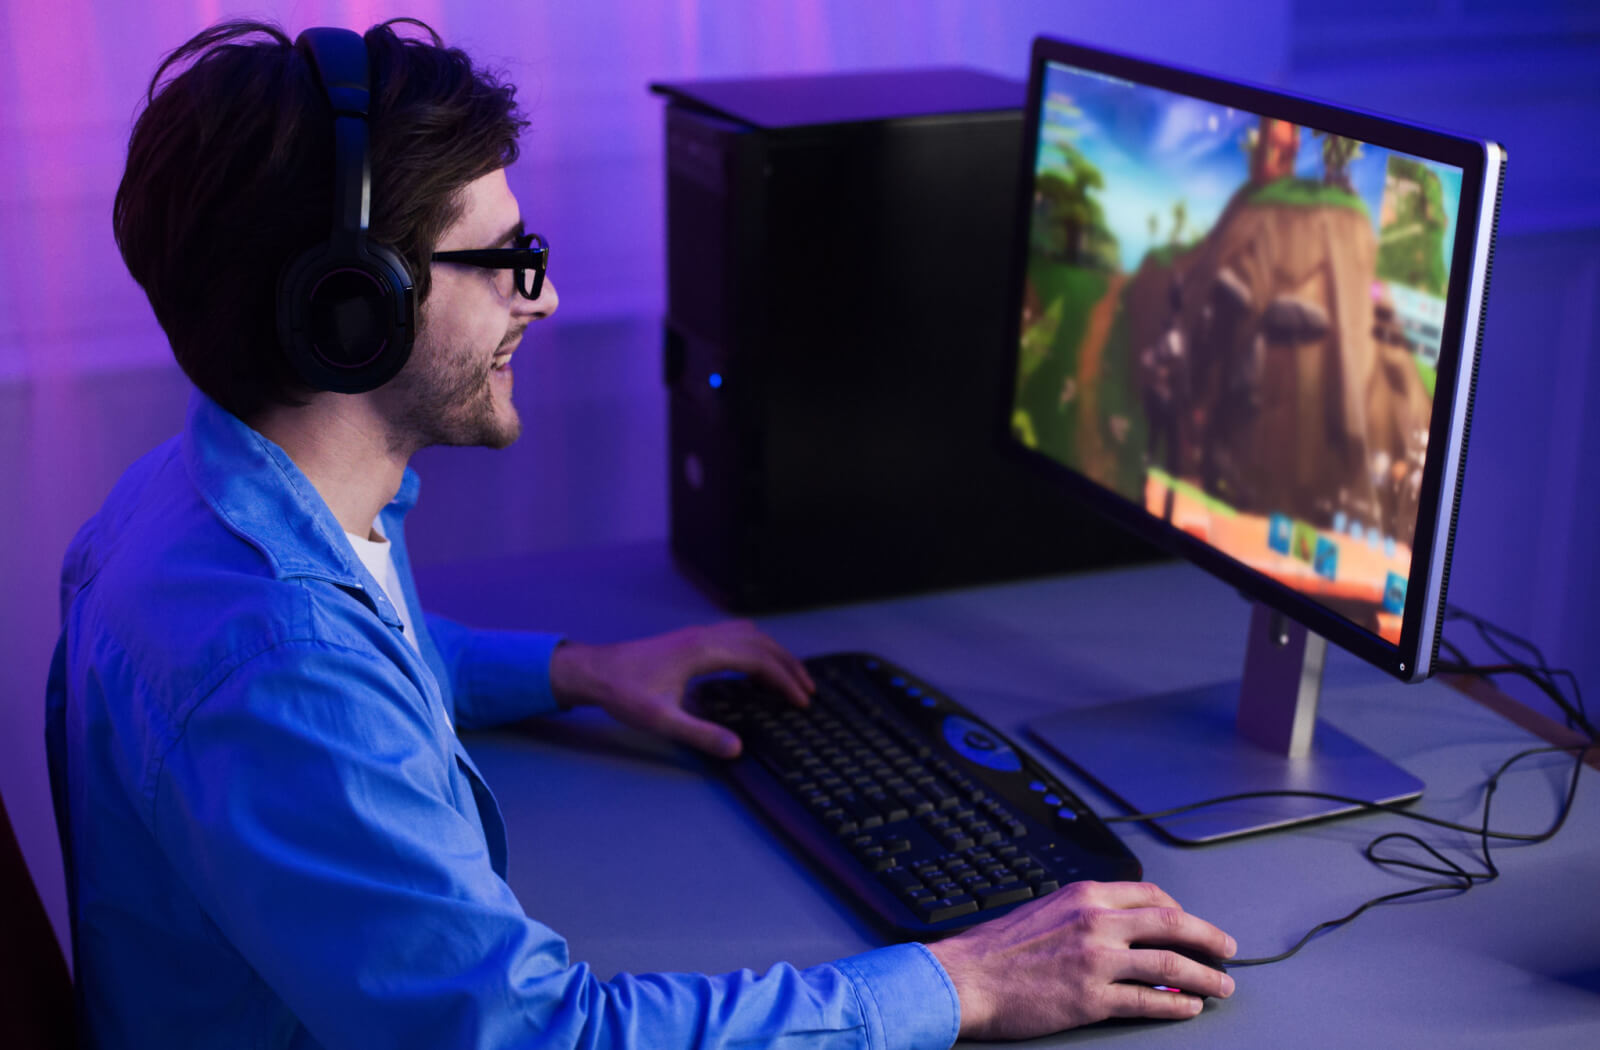 A man wears blue light glasses while playing video games on a computer at arm's length from his eyes to reduce eye strain